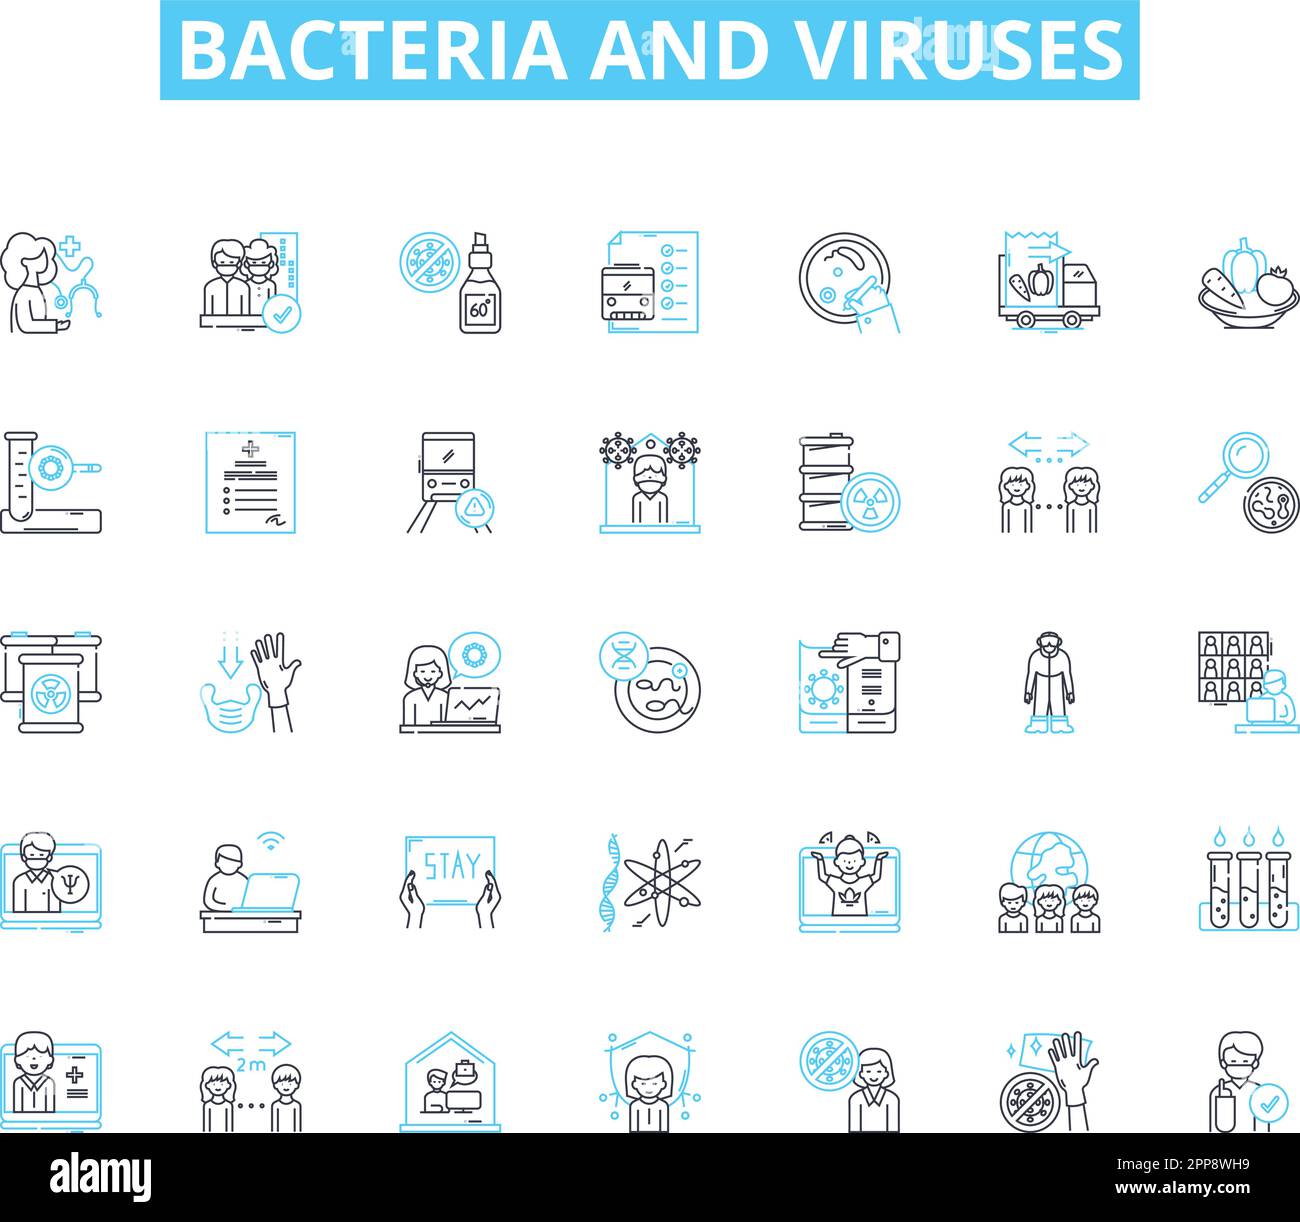 Bacteria and viruses linear icons set. Pathogen, Microbe, Infection, Contagious, Tissue, Epidemic, Host line vector and concept signs. Resistance Stock Vector